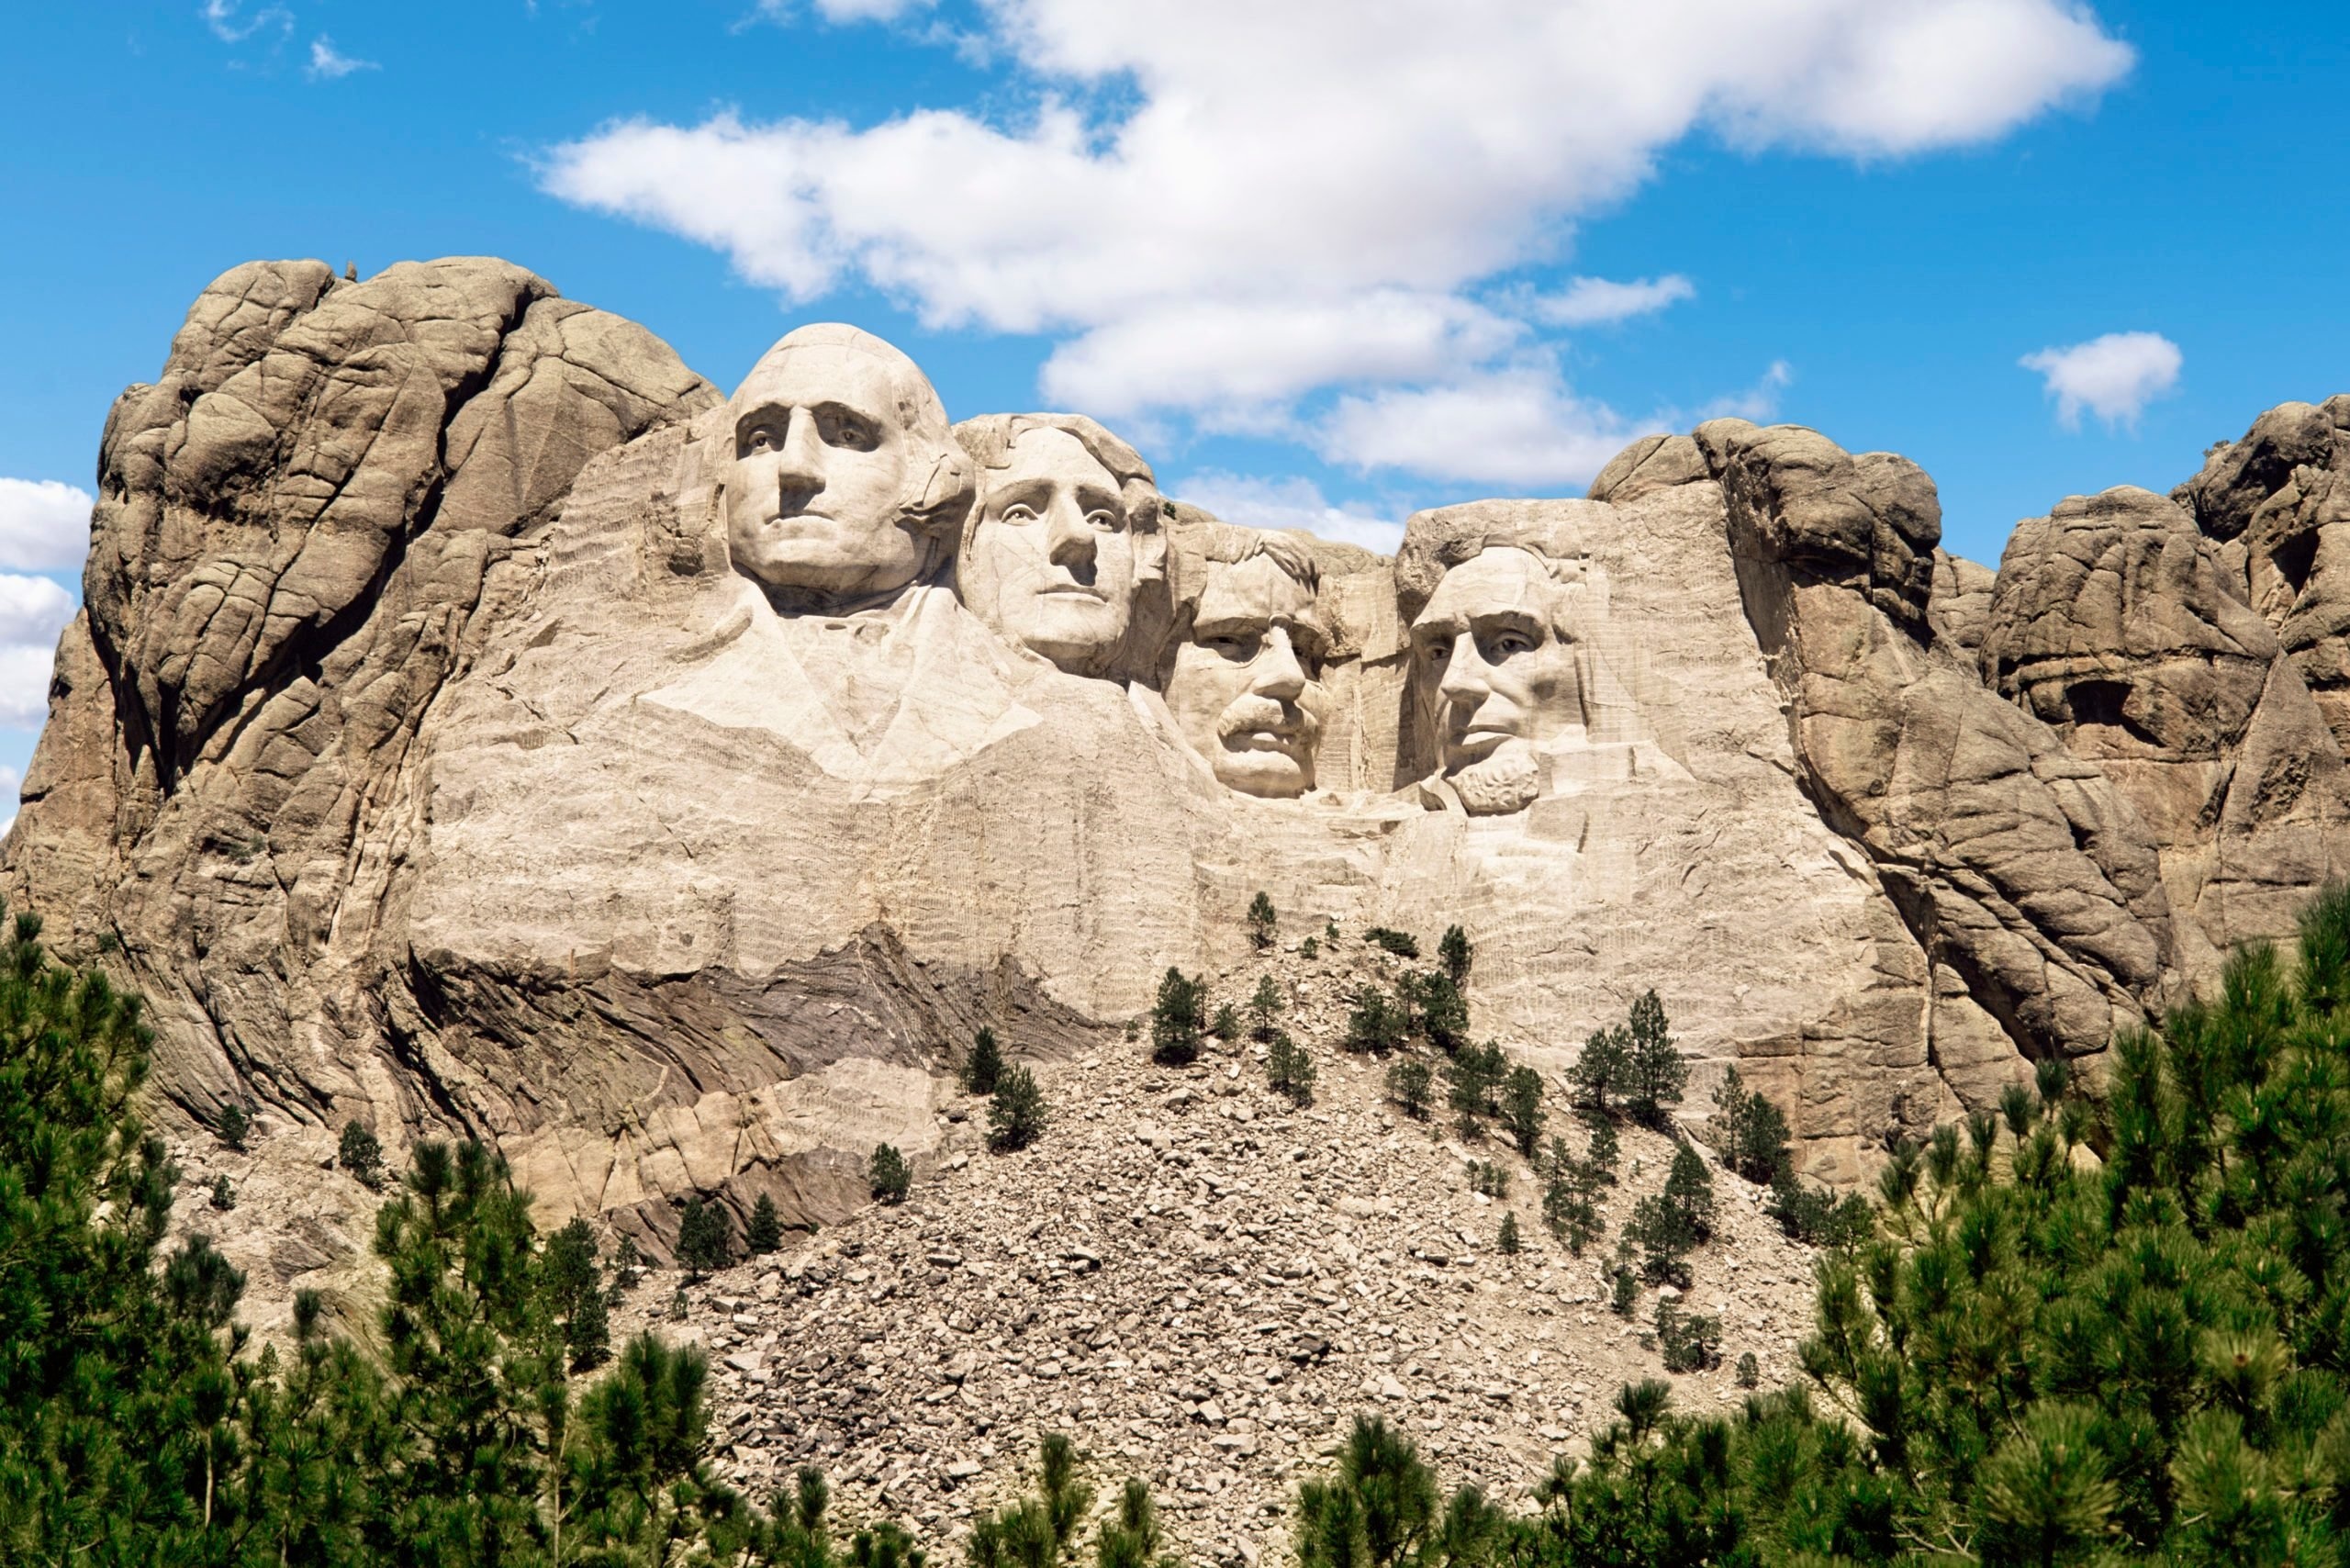 Mount Rushmore, Road trip guide, Reader's digest, Vacation, 2560x1710 HD Desktop